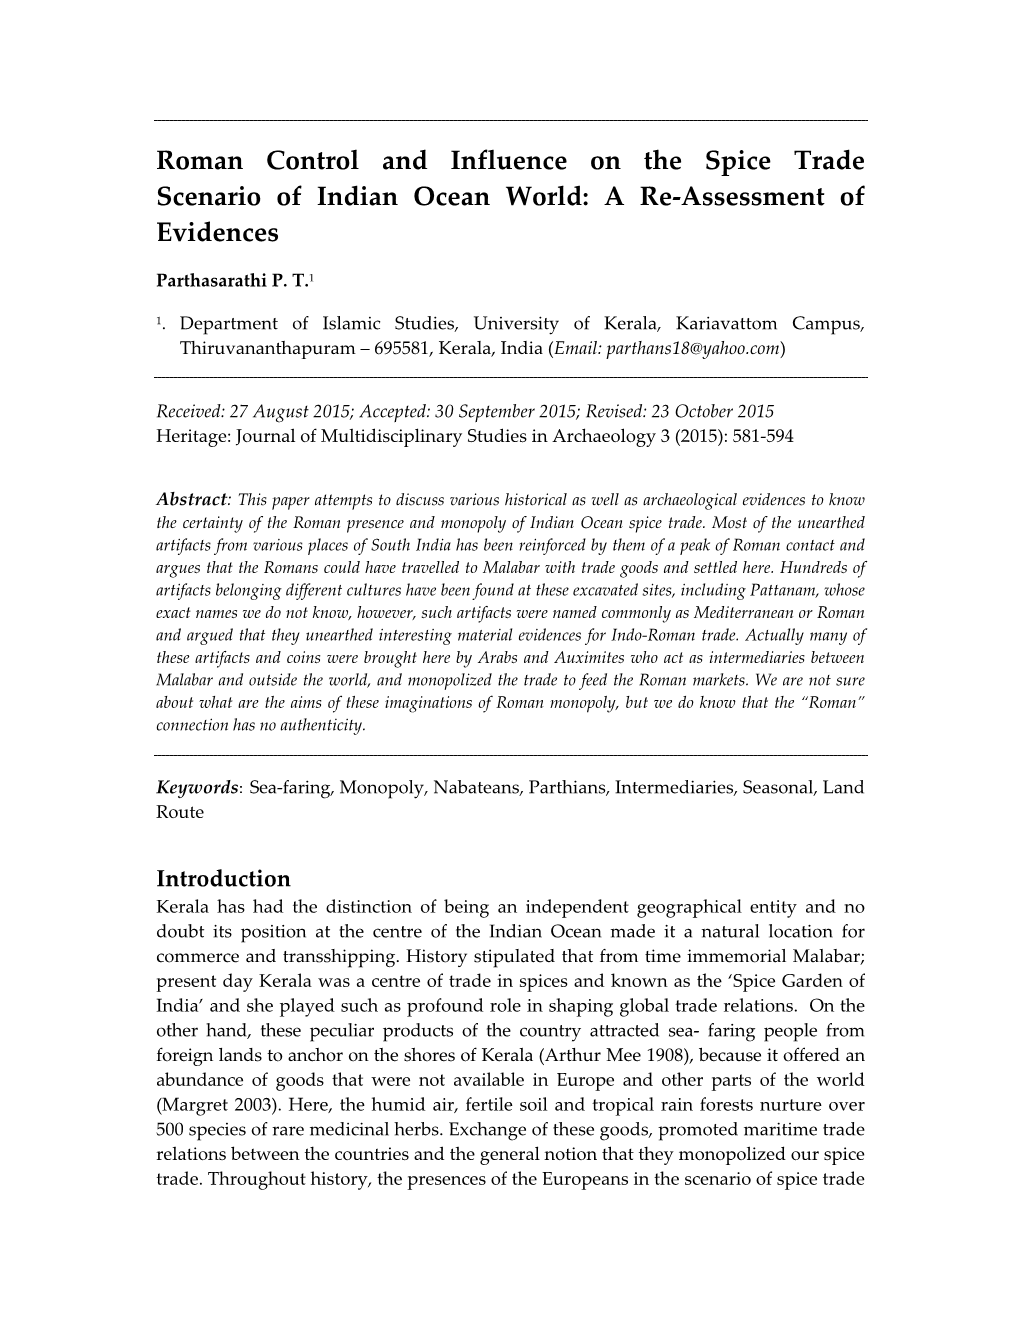 Roman Control and Influence on the Spice Trade Scenario of Indian Ocean World: a Re‐Assessment of Evidences